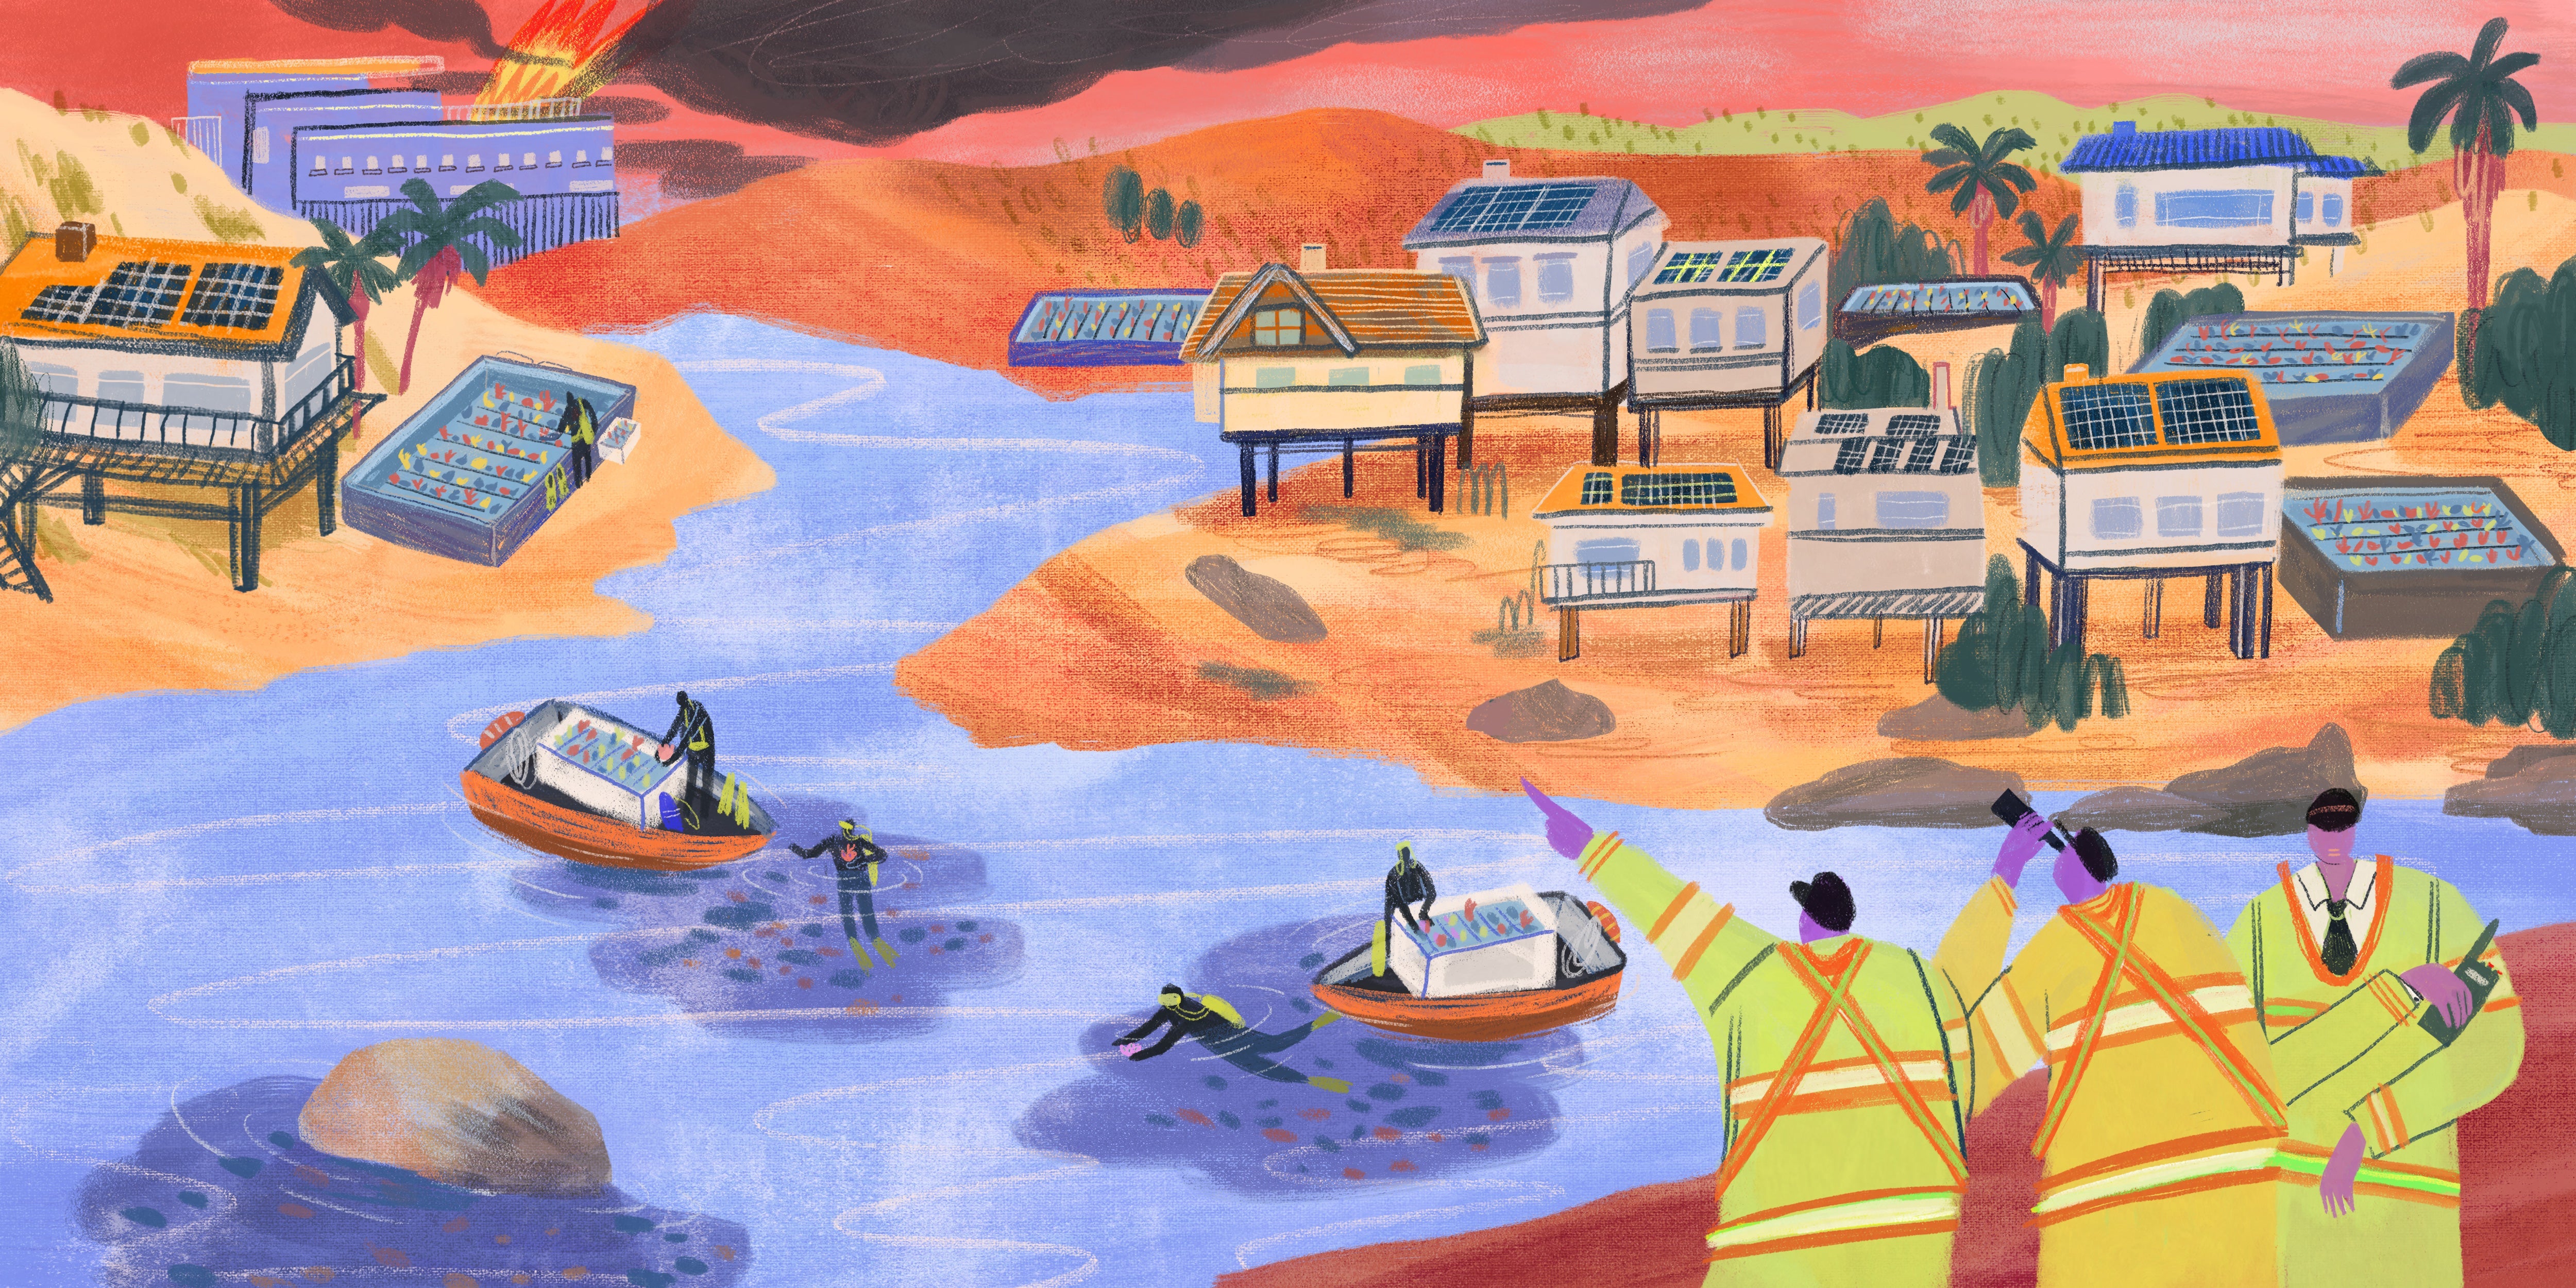 While a tropical town floods, prospectors try to scope the situation and people float atop in the water in boats.